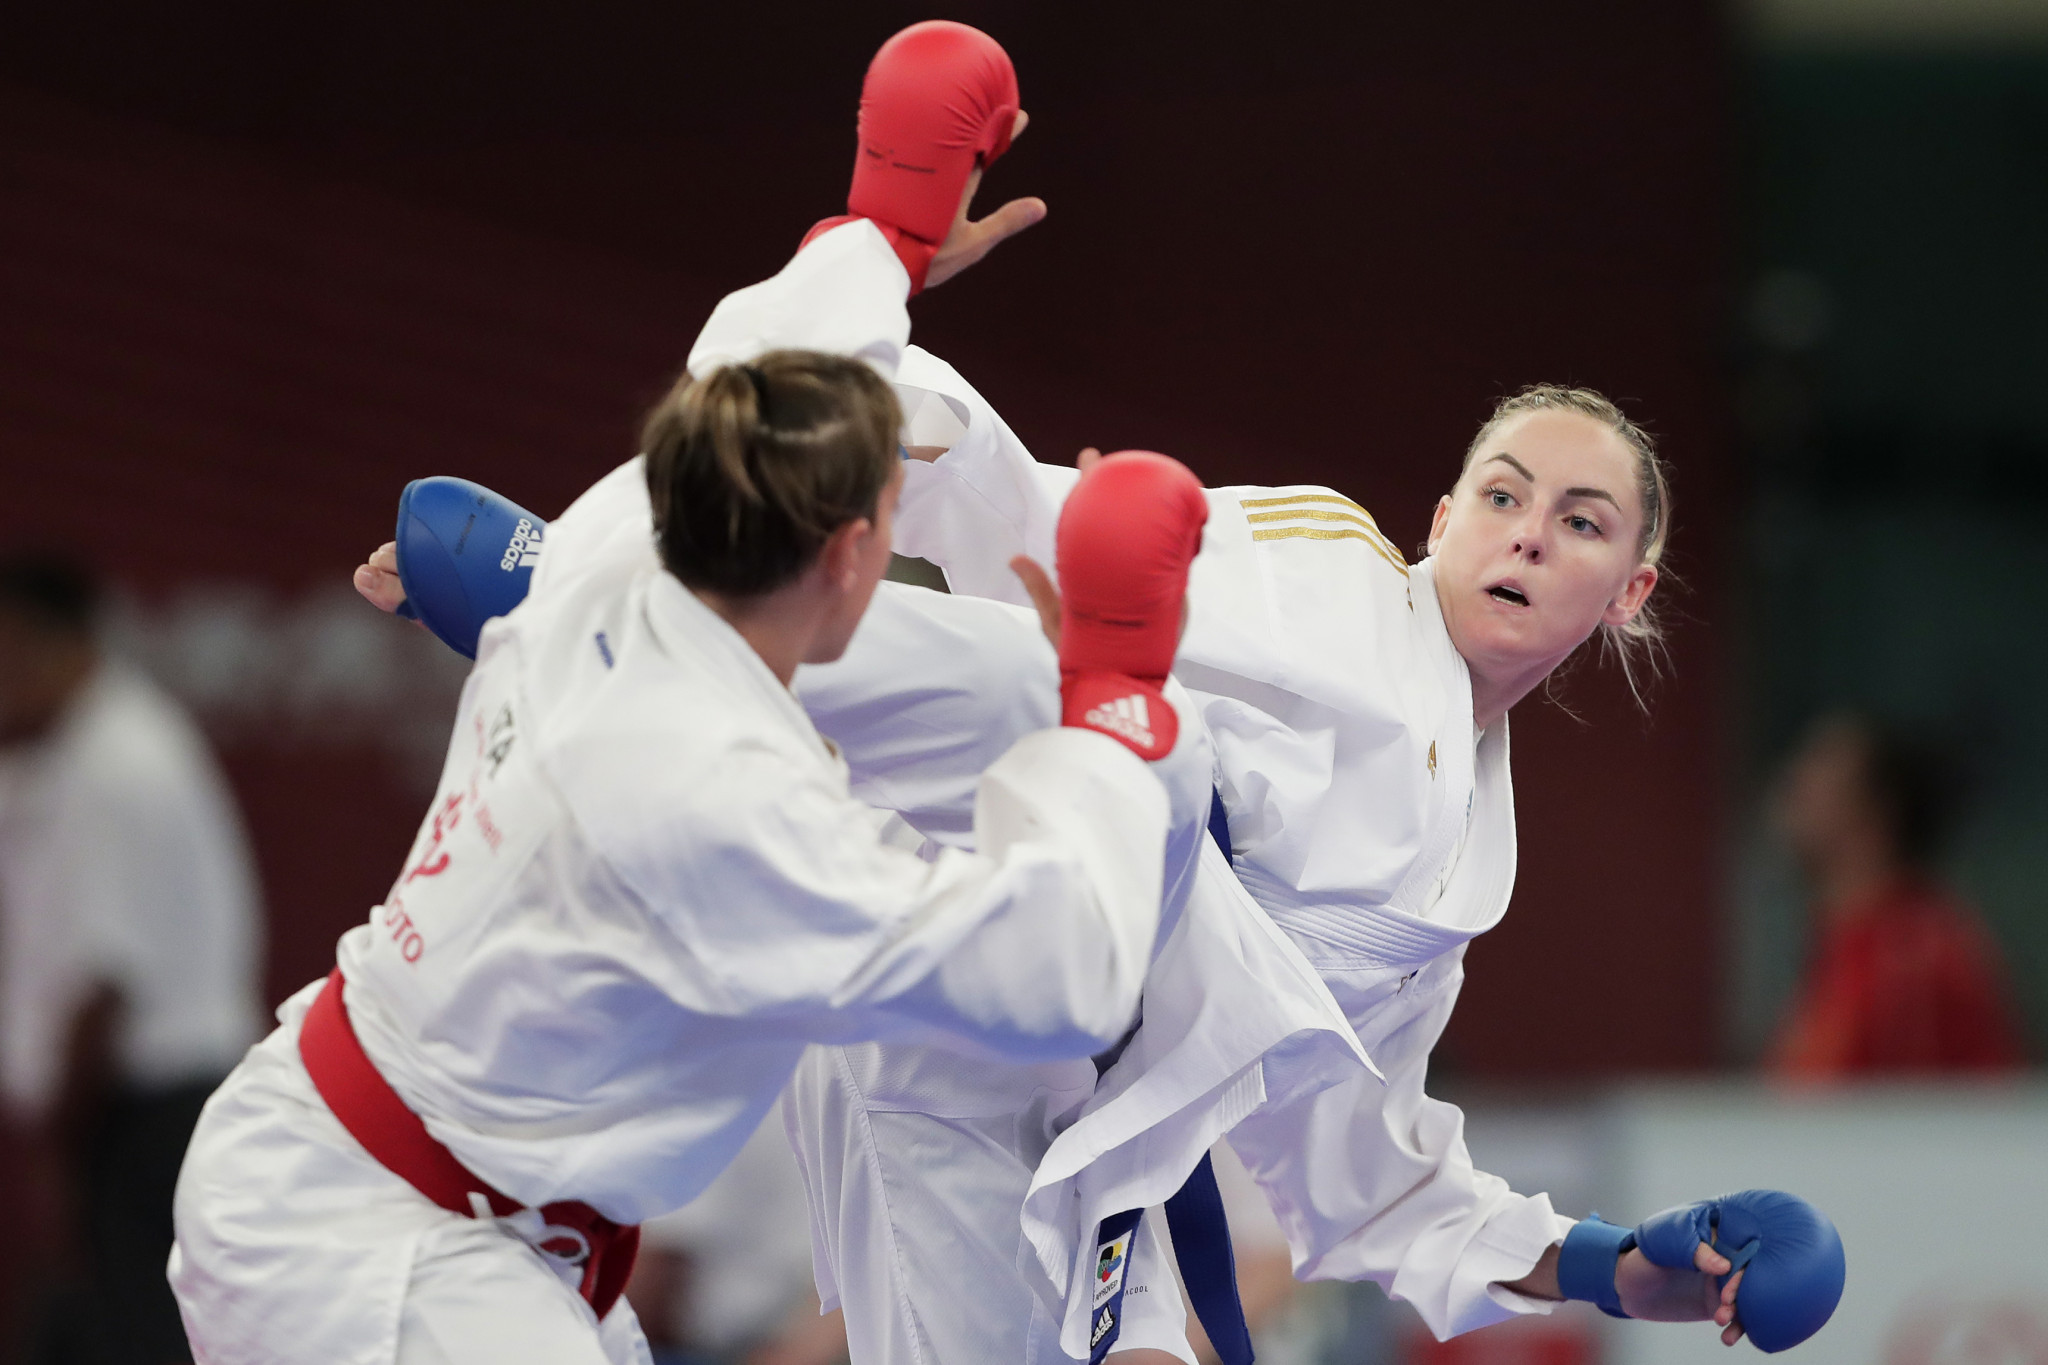 COVID-19 tests on day of events at Olympic karate qualifier in France